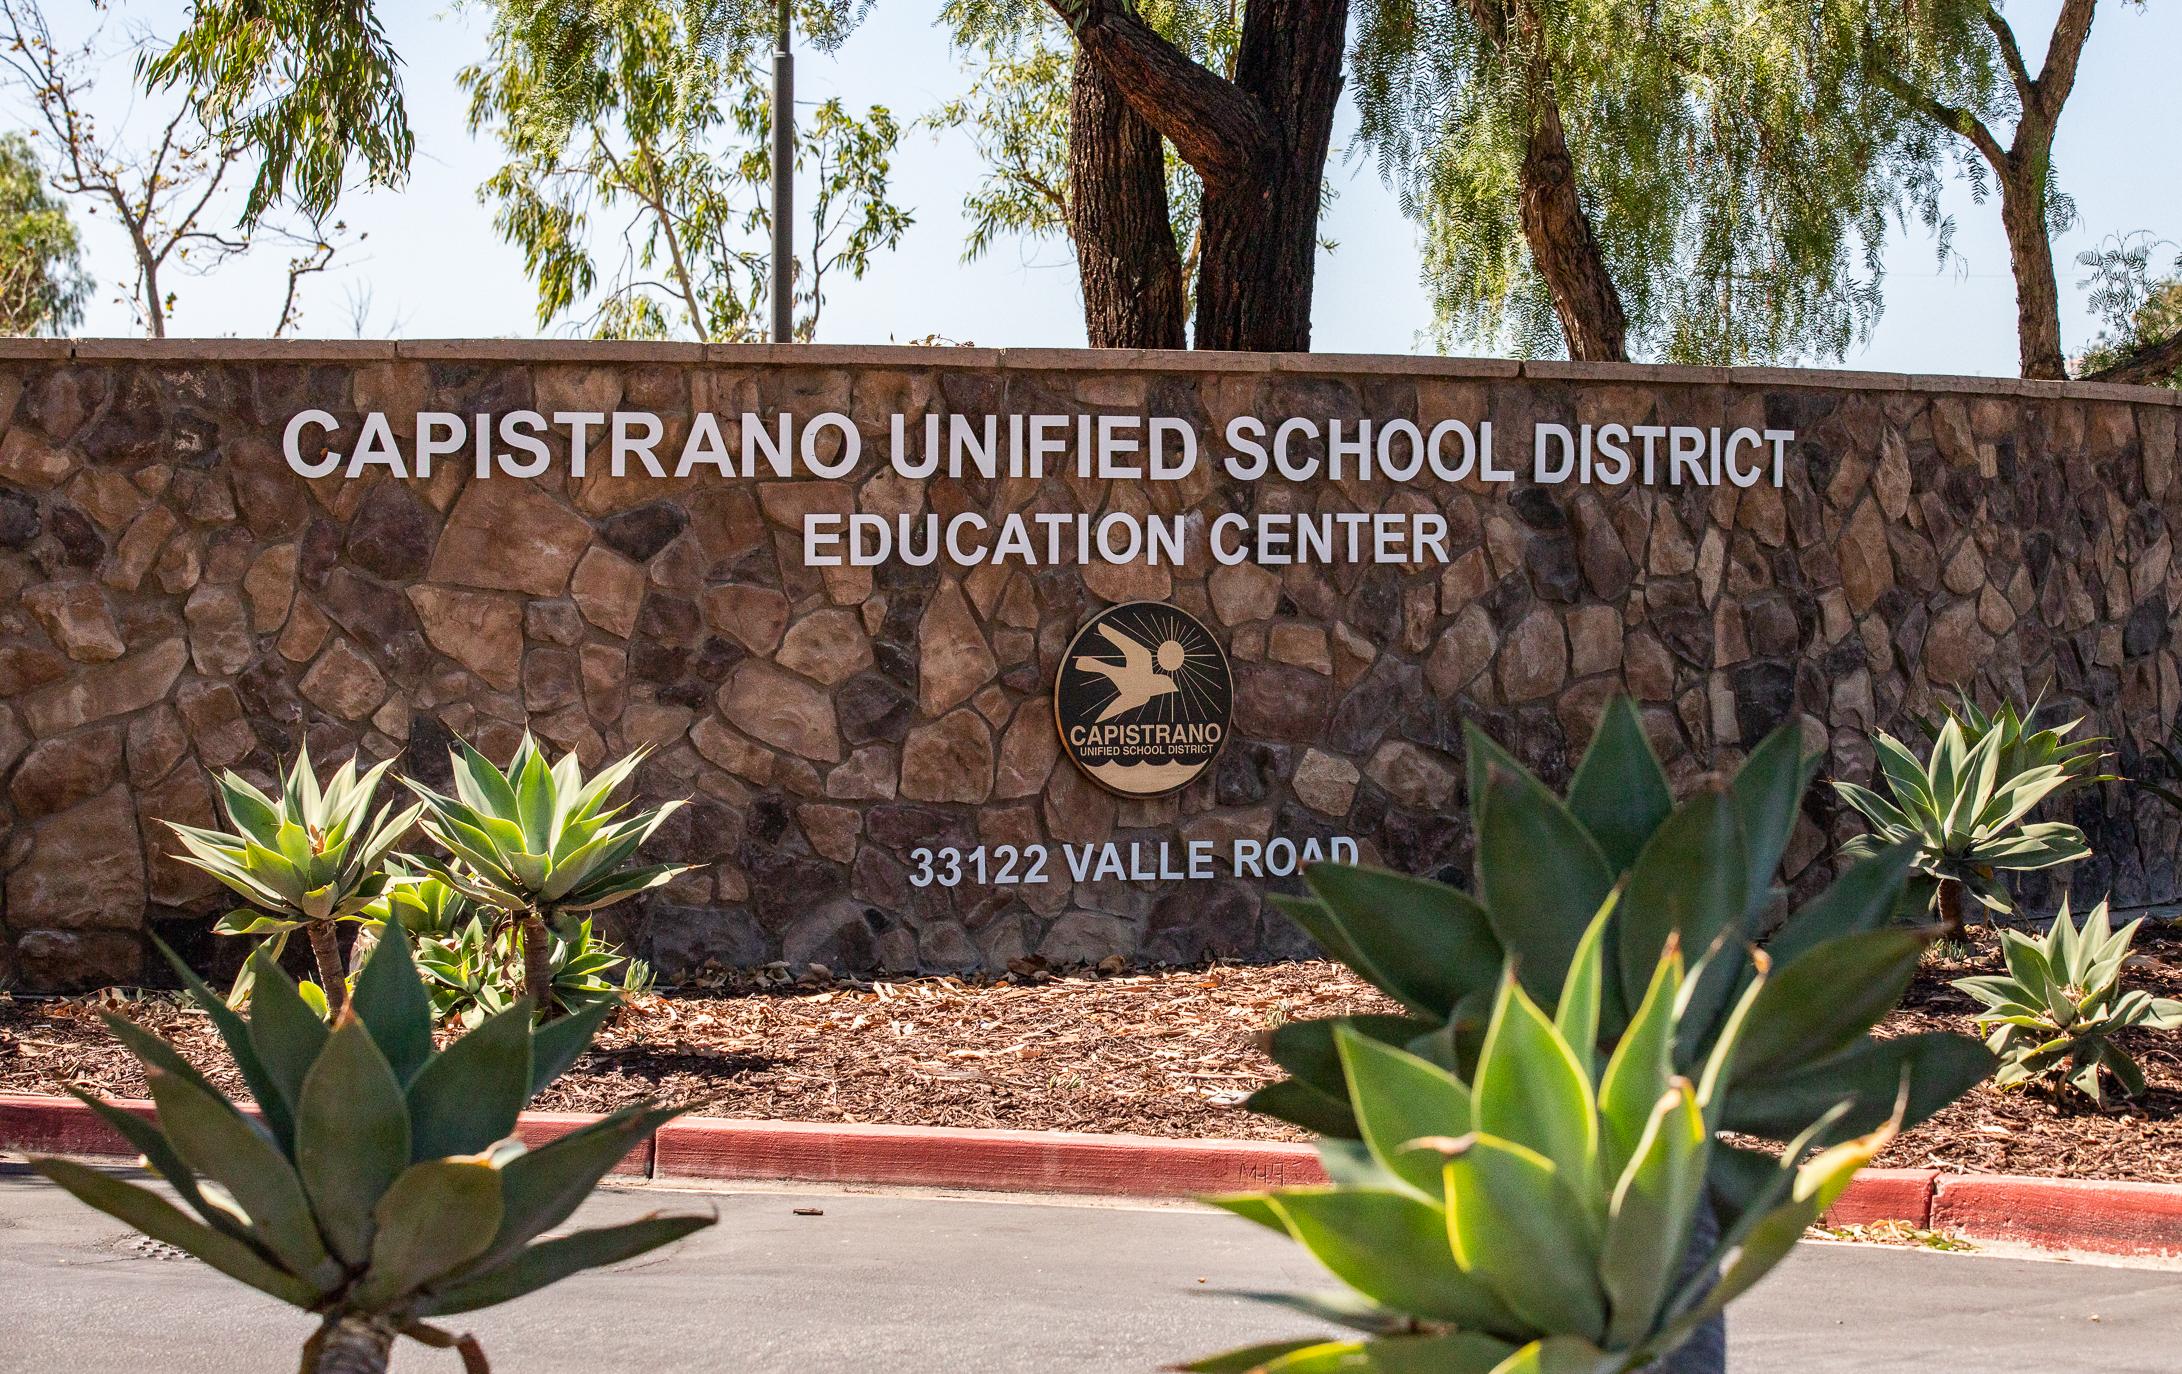 Capistrano Unified Rejects Policy Notifying Parents of Child’s Mental Health Crisis